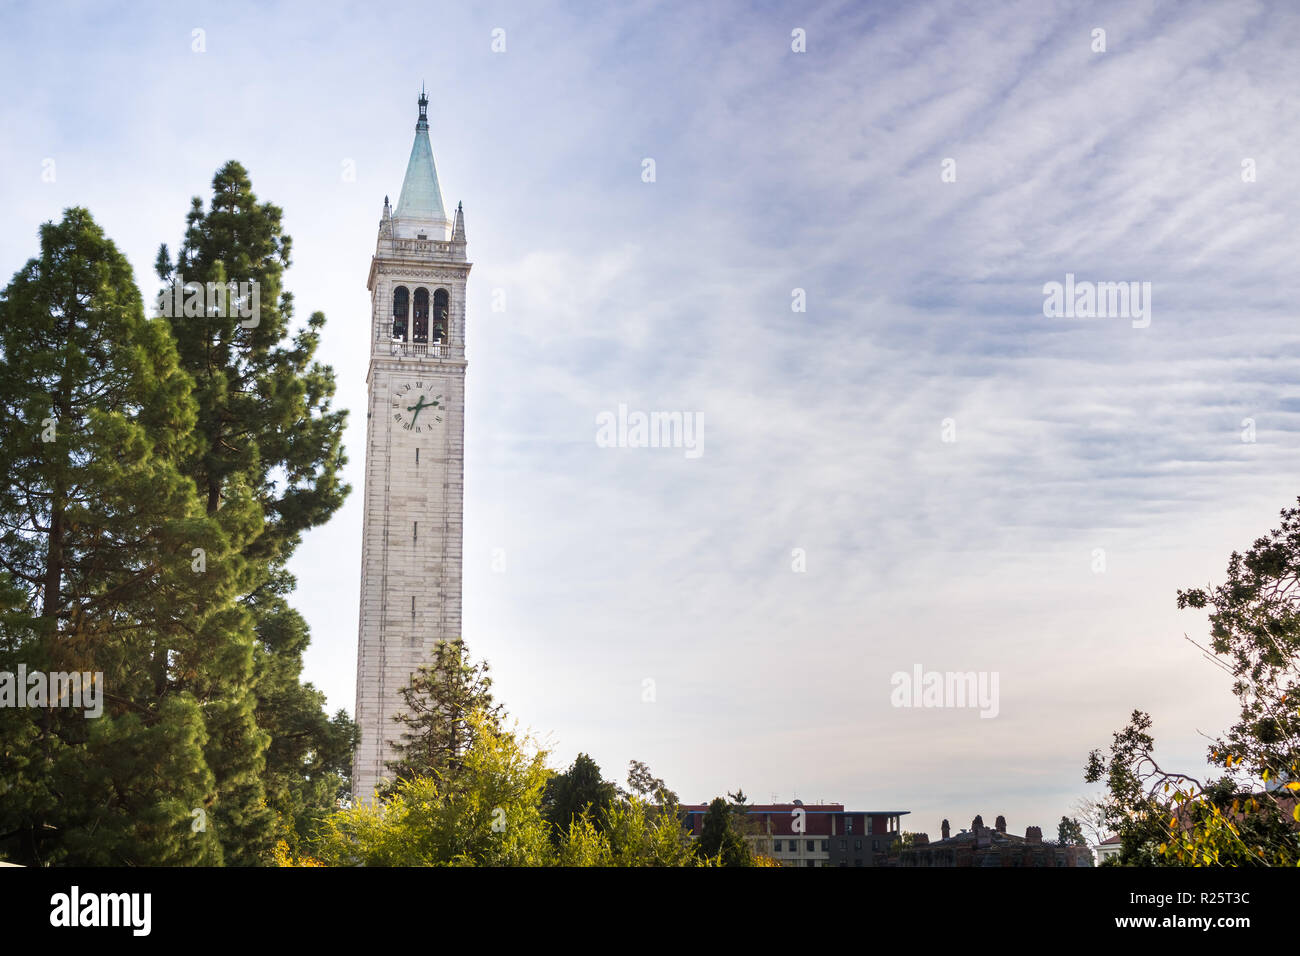 Sather tower (the Campanile) on a cloudy sky background, UC Berkeley, California, San Francisco bay Stock Photo